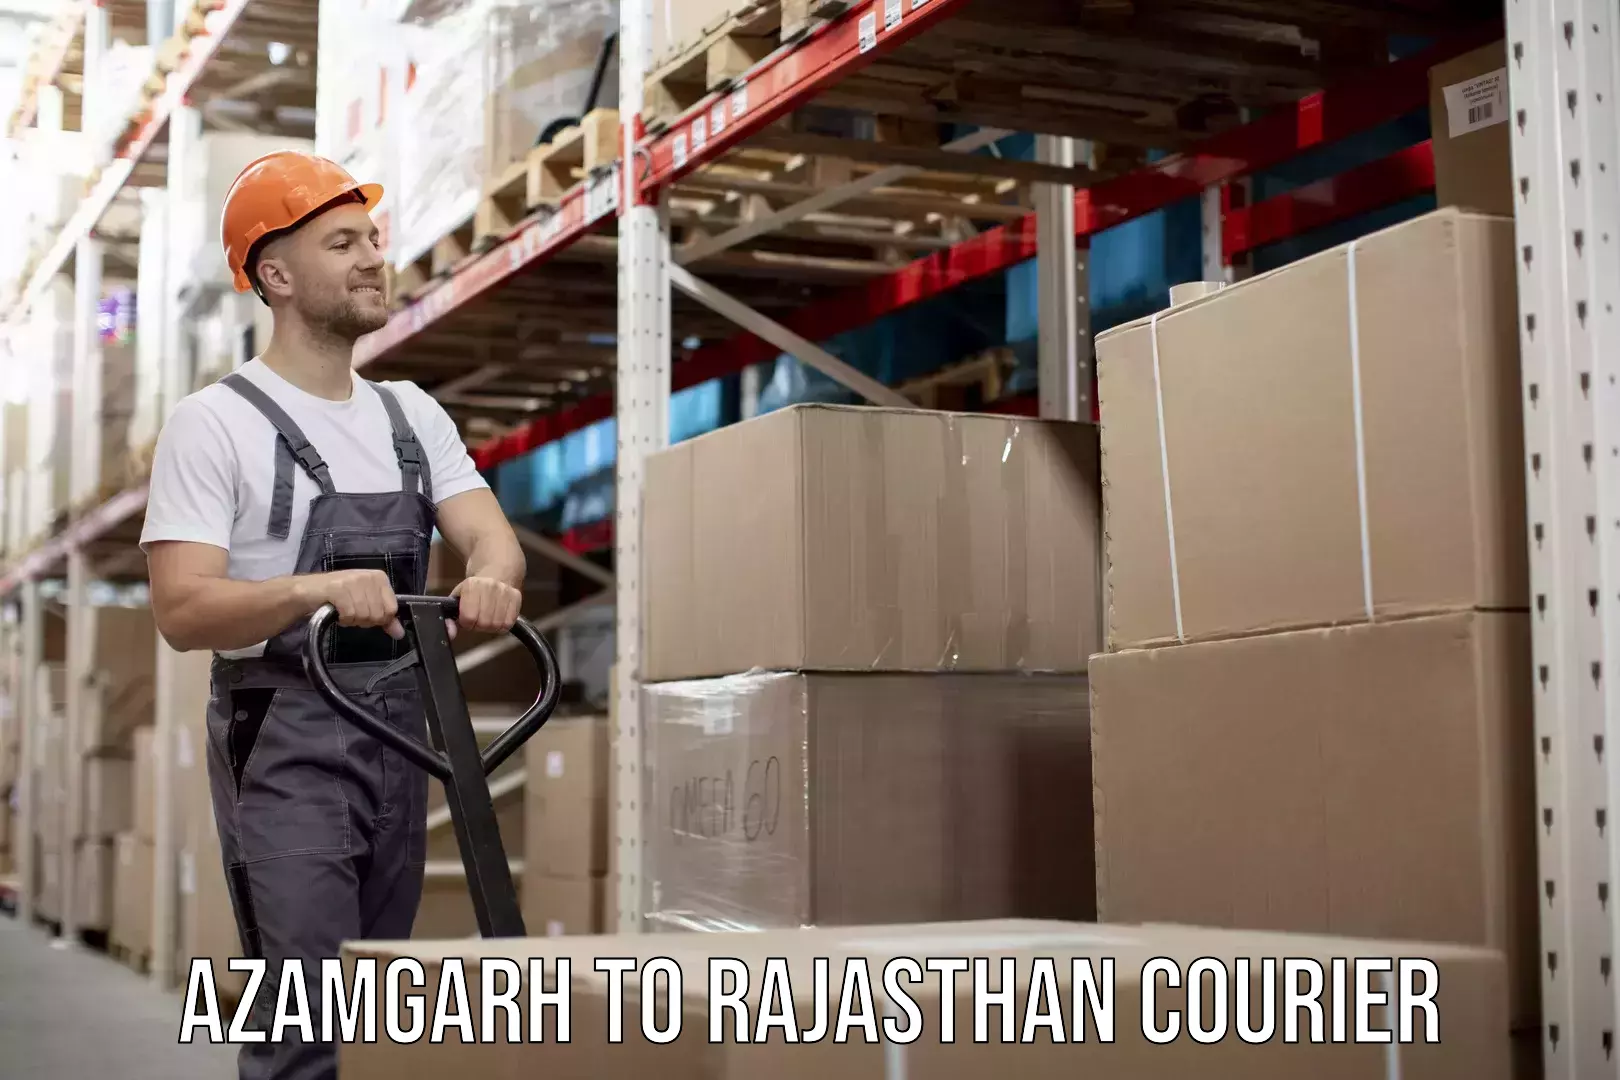 Global courier networks Azamgarh to Rajasthan